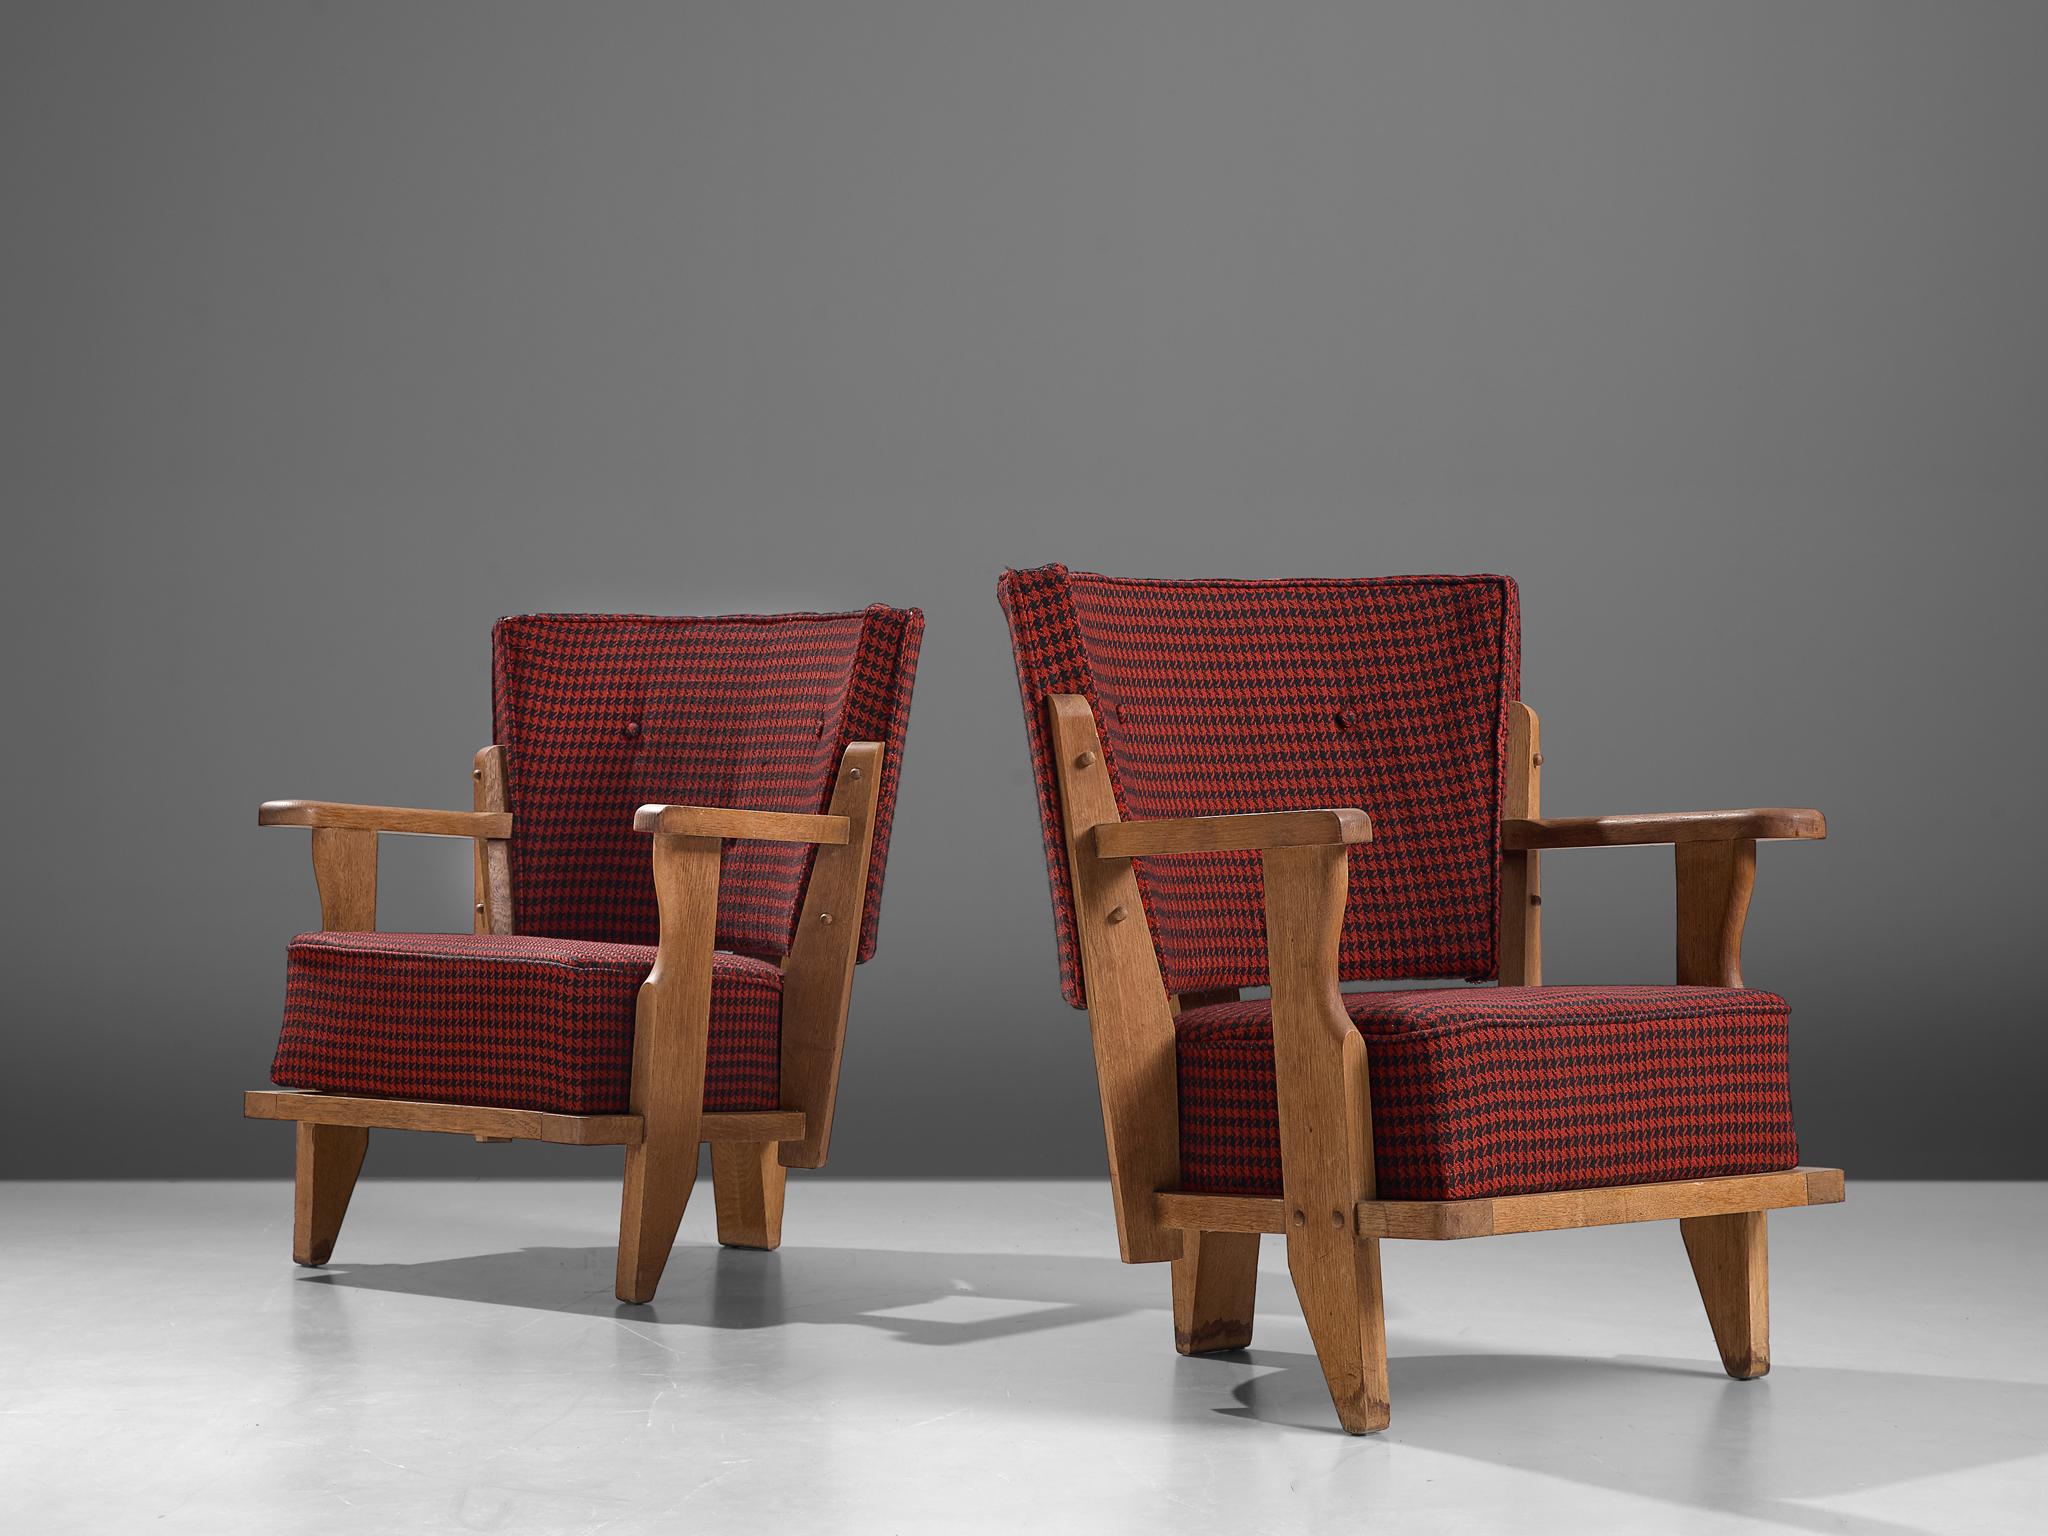 Guillerme & Chambron for Votre Maison, pair of lounge chairs, fabric and oak, France, 1960s.

An extraordinary Guillerme and Chambron pair of lounge chair in solid oak with the typical characteristic sturdy carved frame. The sculptural chair